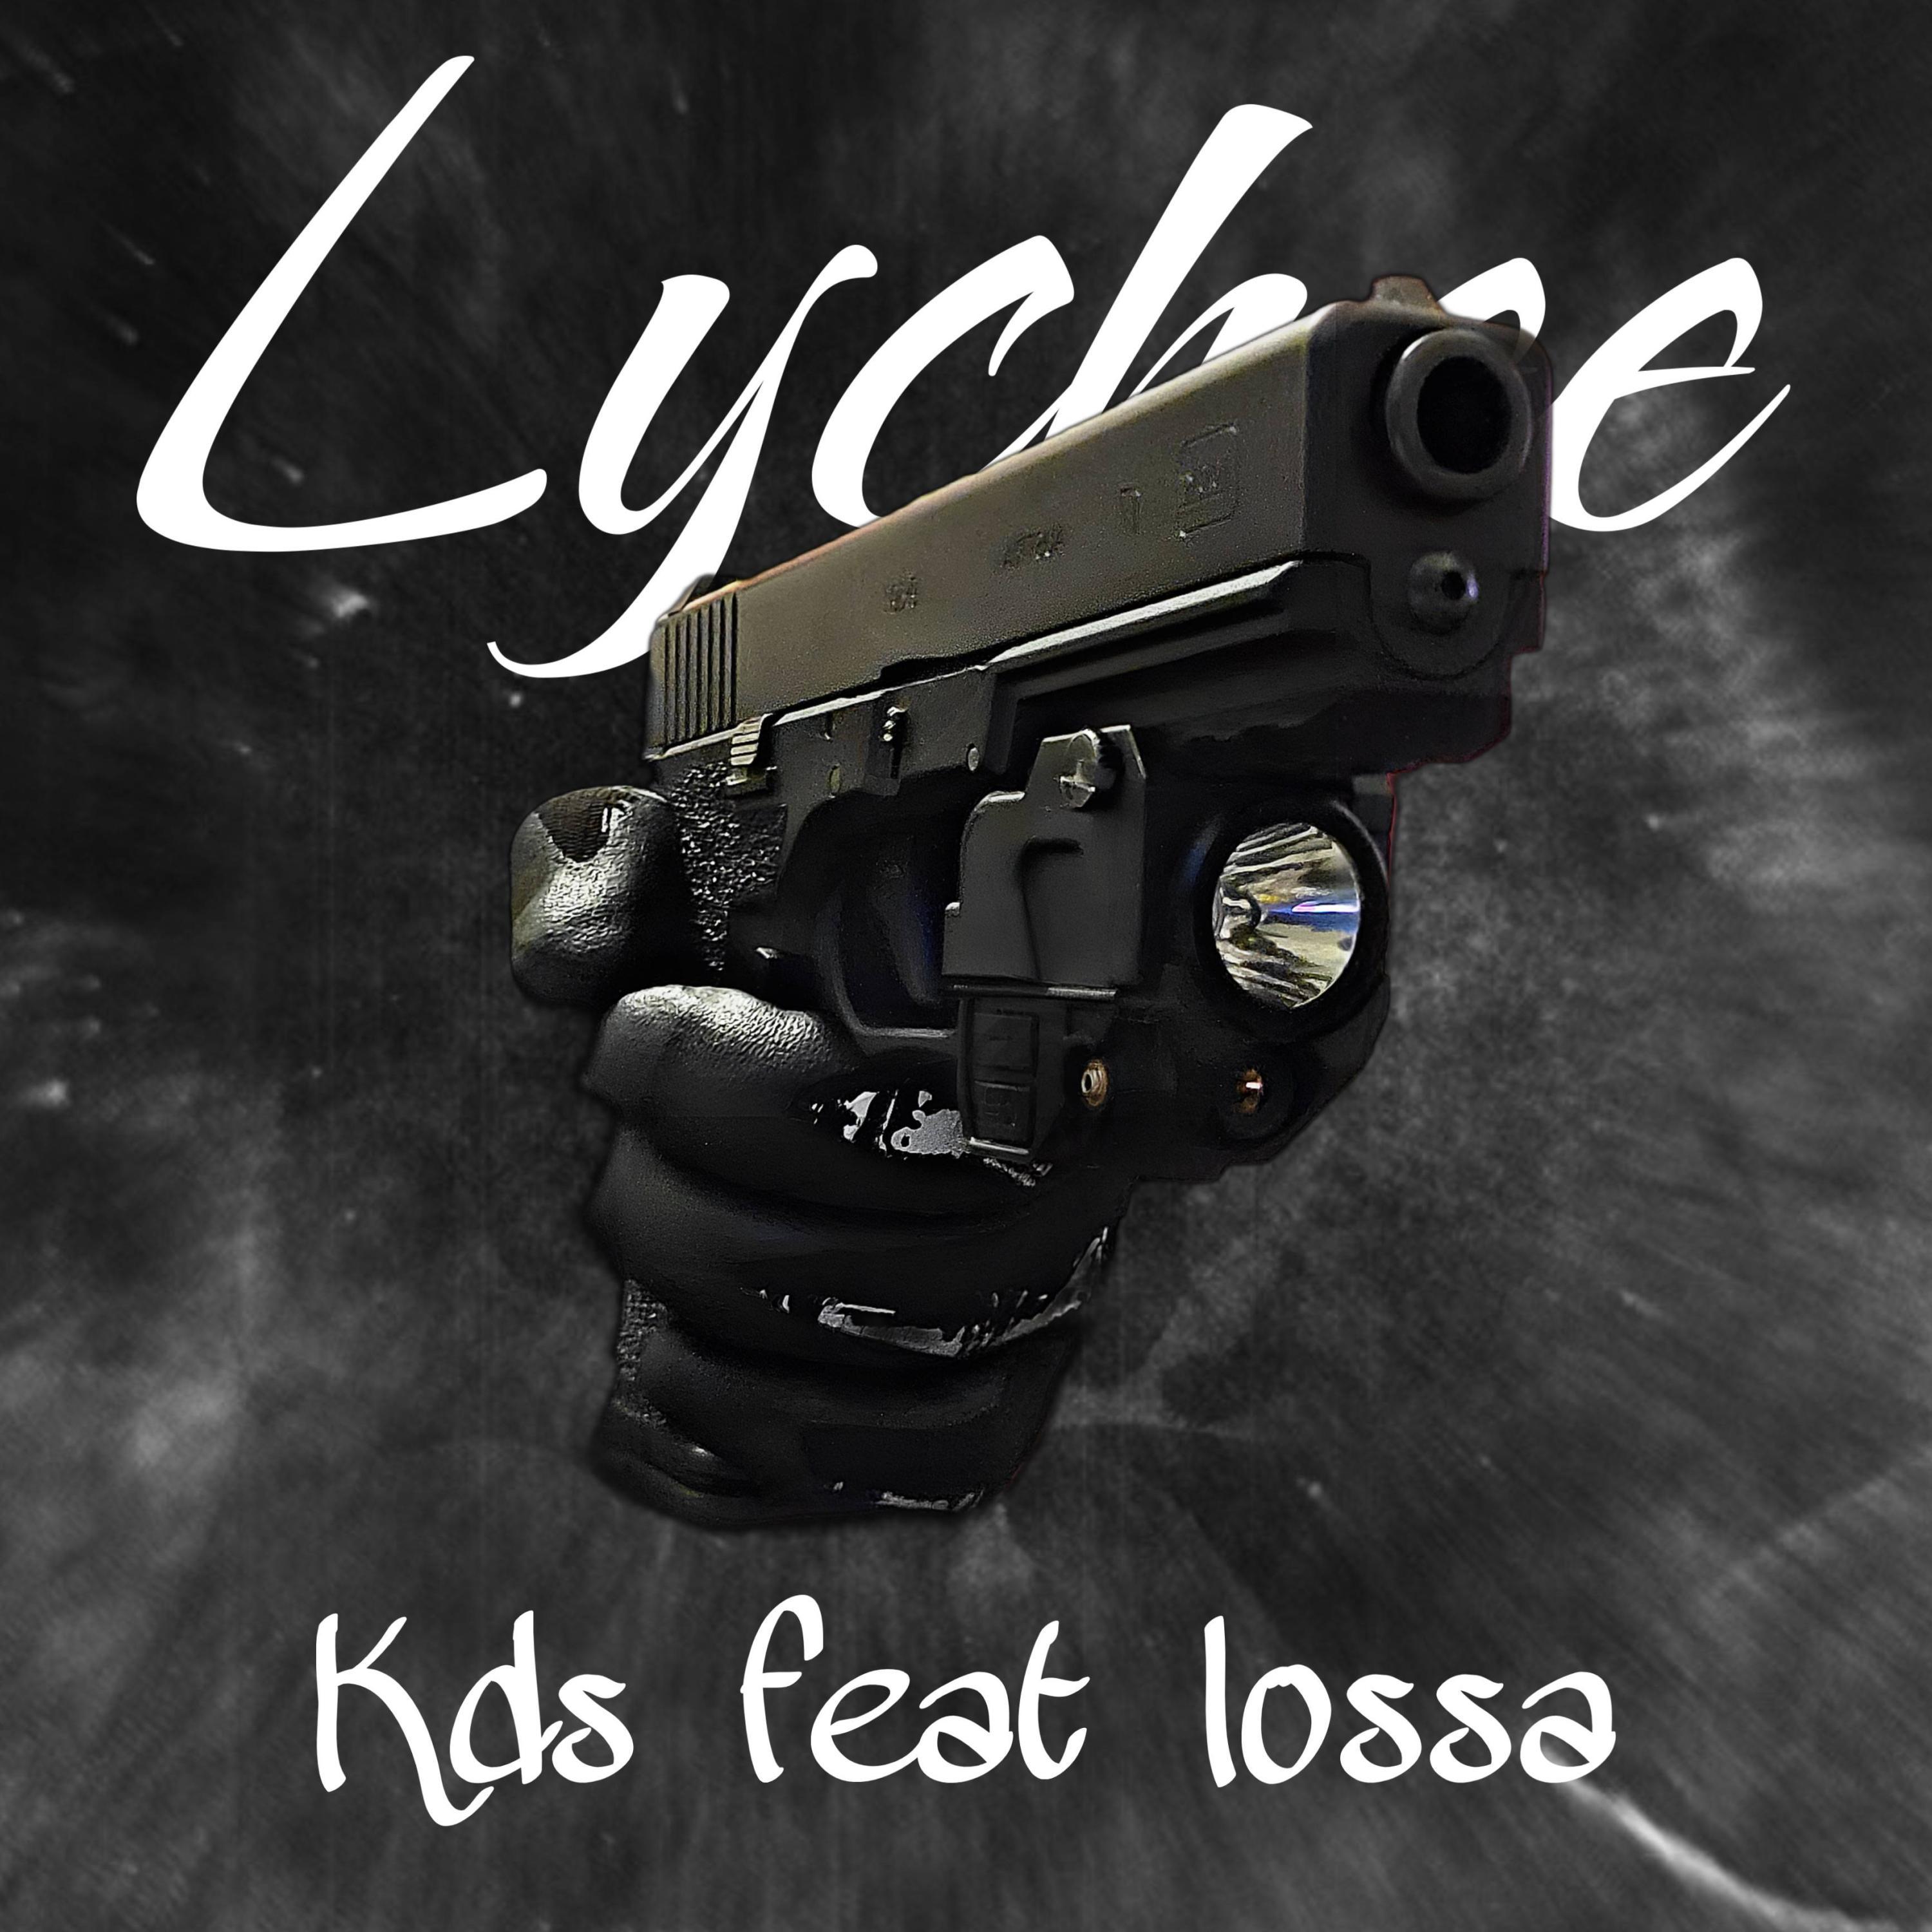 Kds - Lychee (feat. Lossa)